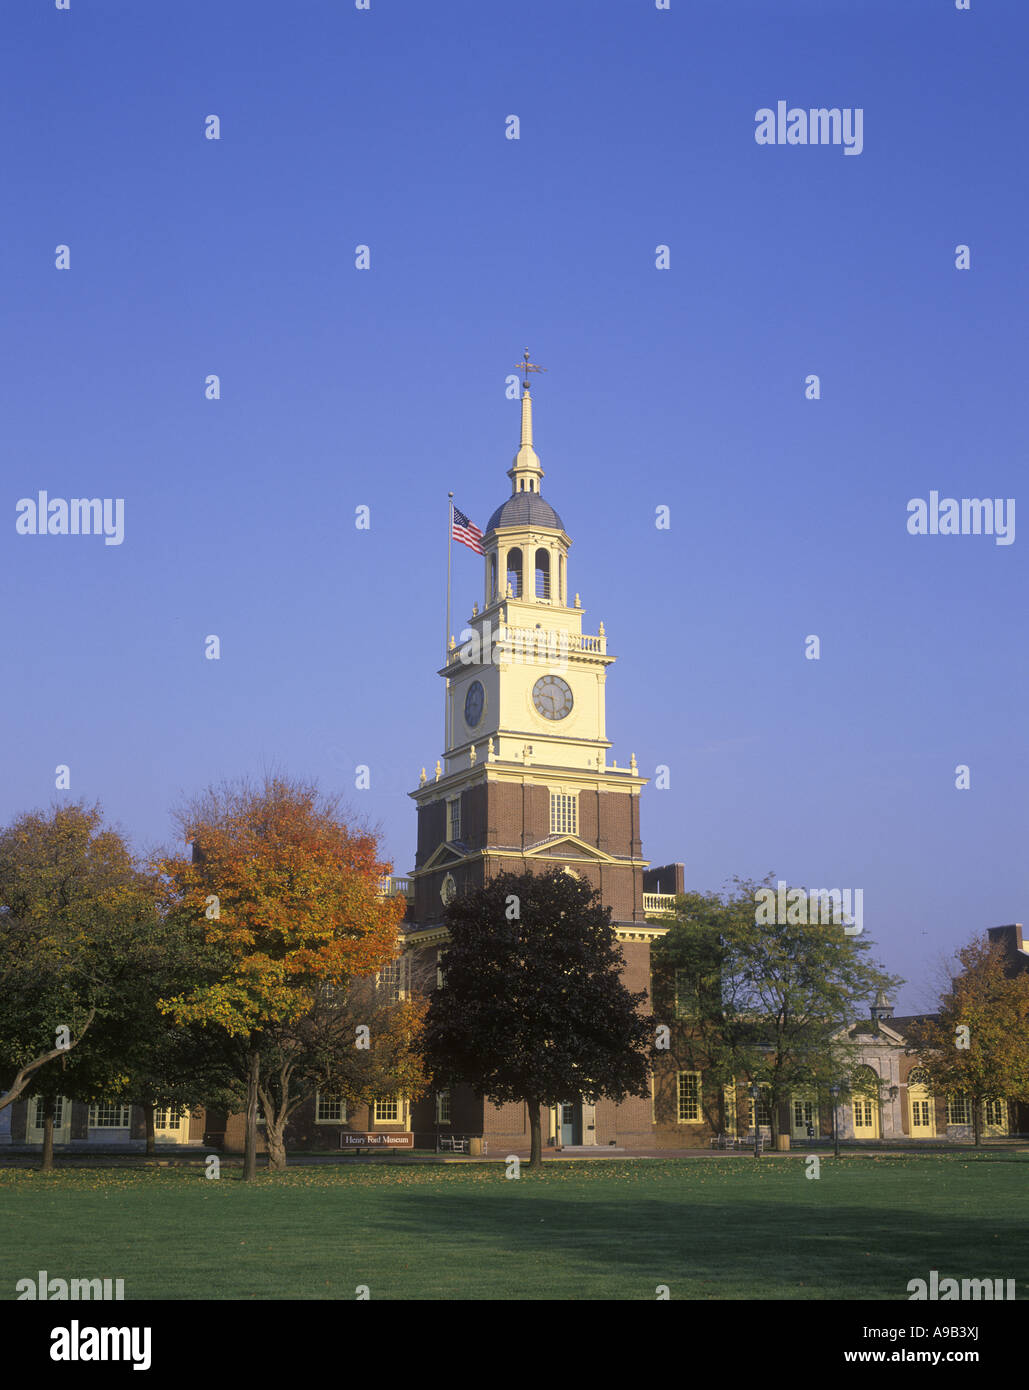 CLOCK TOWER AND INDEPENDENCE HALL REPLICA HENRY FORD MUSEUM DEARBORN MICHIGAN USA Stock Photo